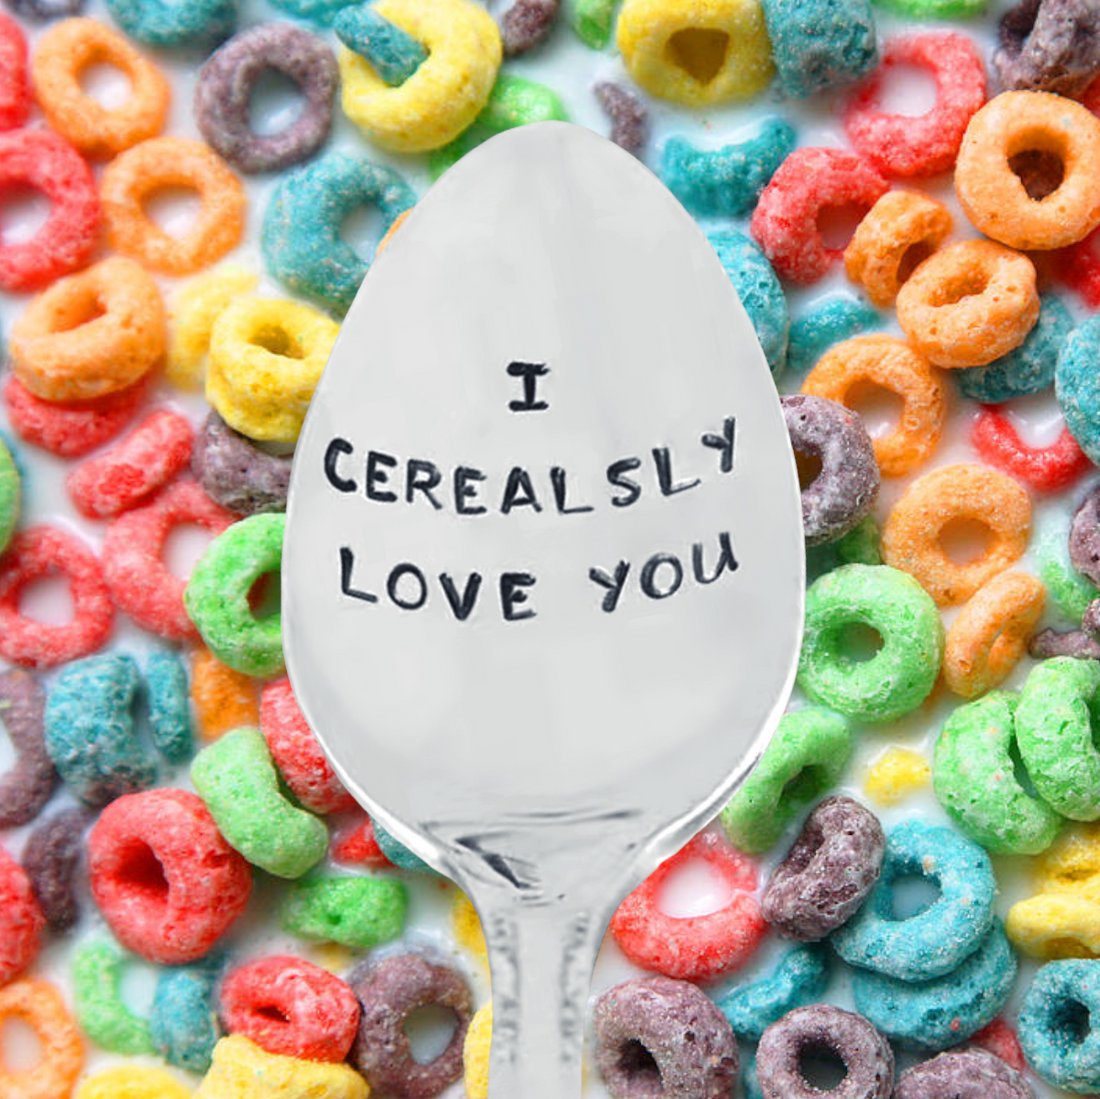 I CEREALSLY LOVE YOU ENGRAVED SPOON